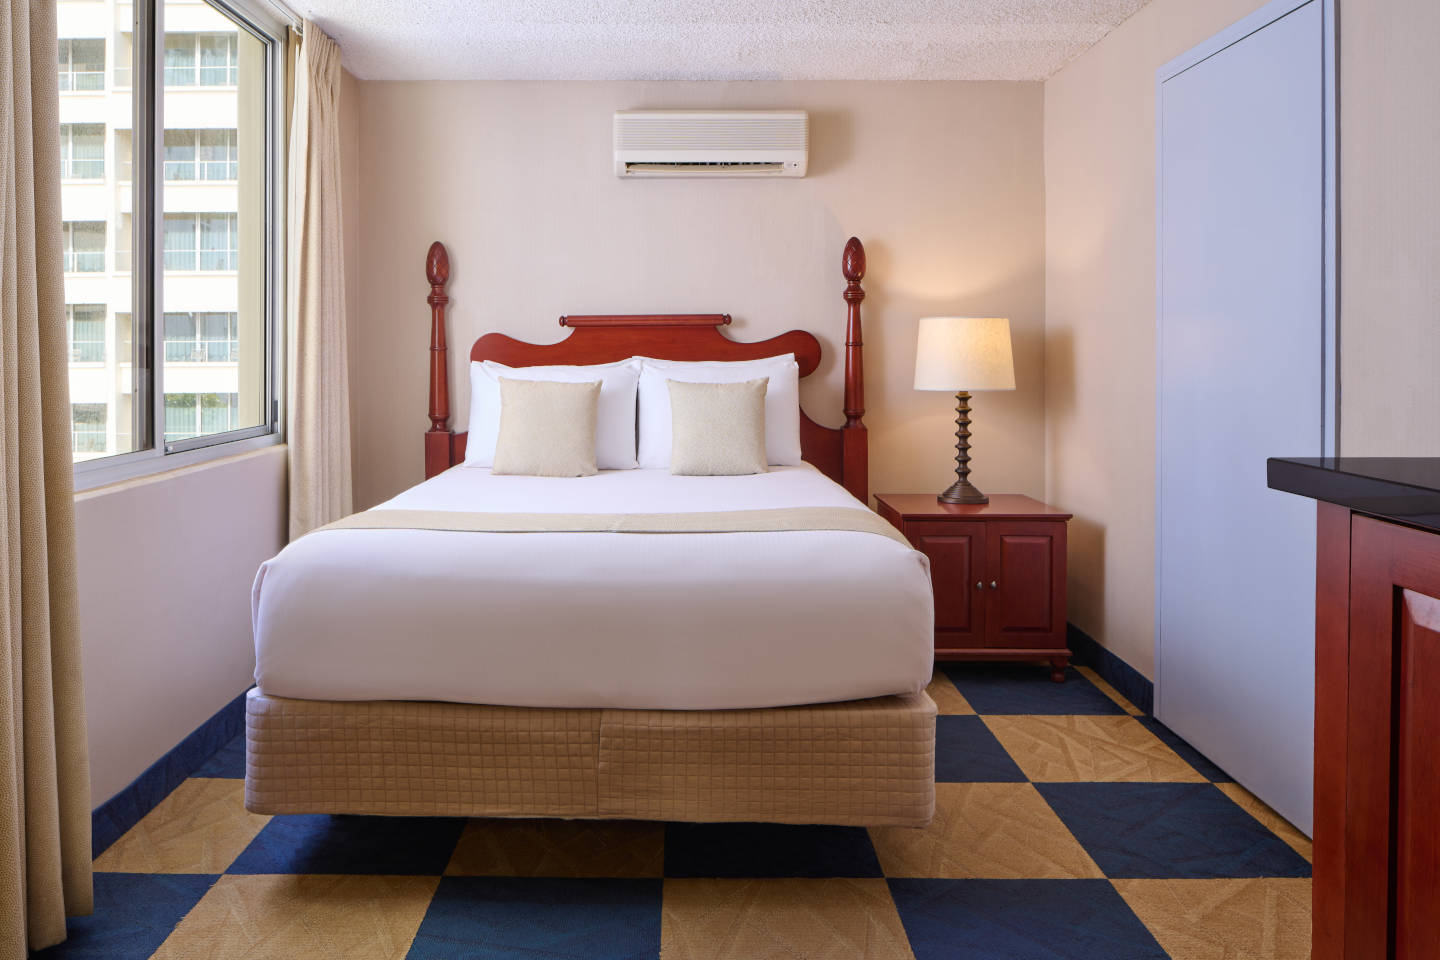 Moderate Hotel Room with queen bed configuration and nightstand with lamp